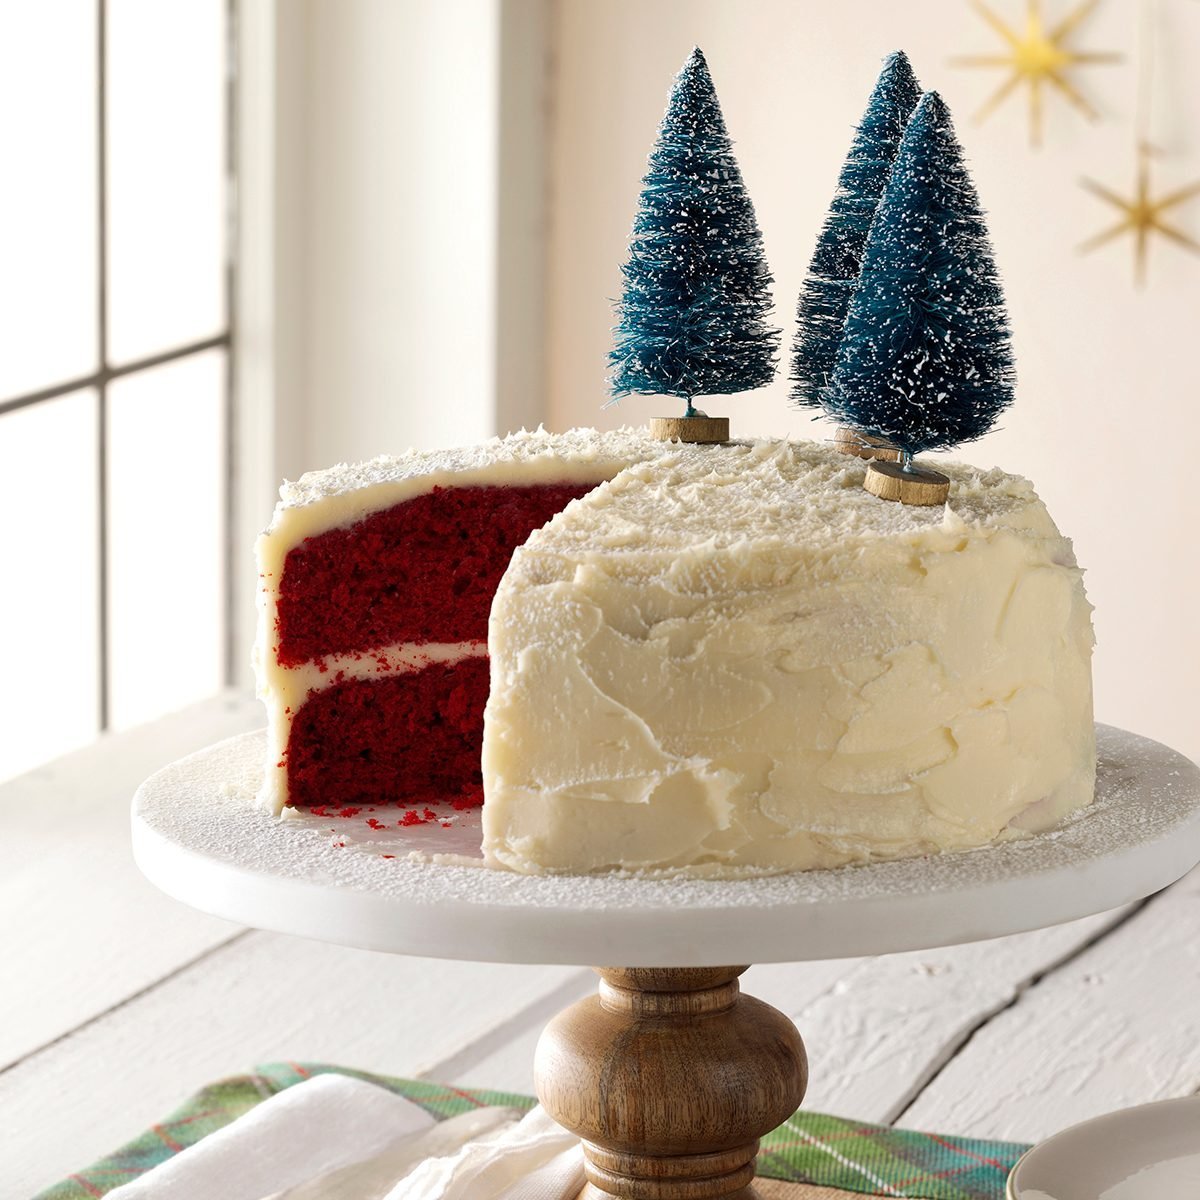 Our Very Best Christmas Cakes